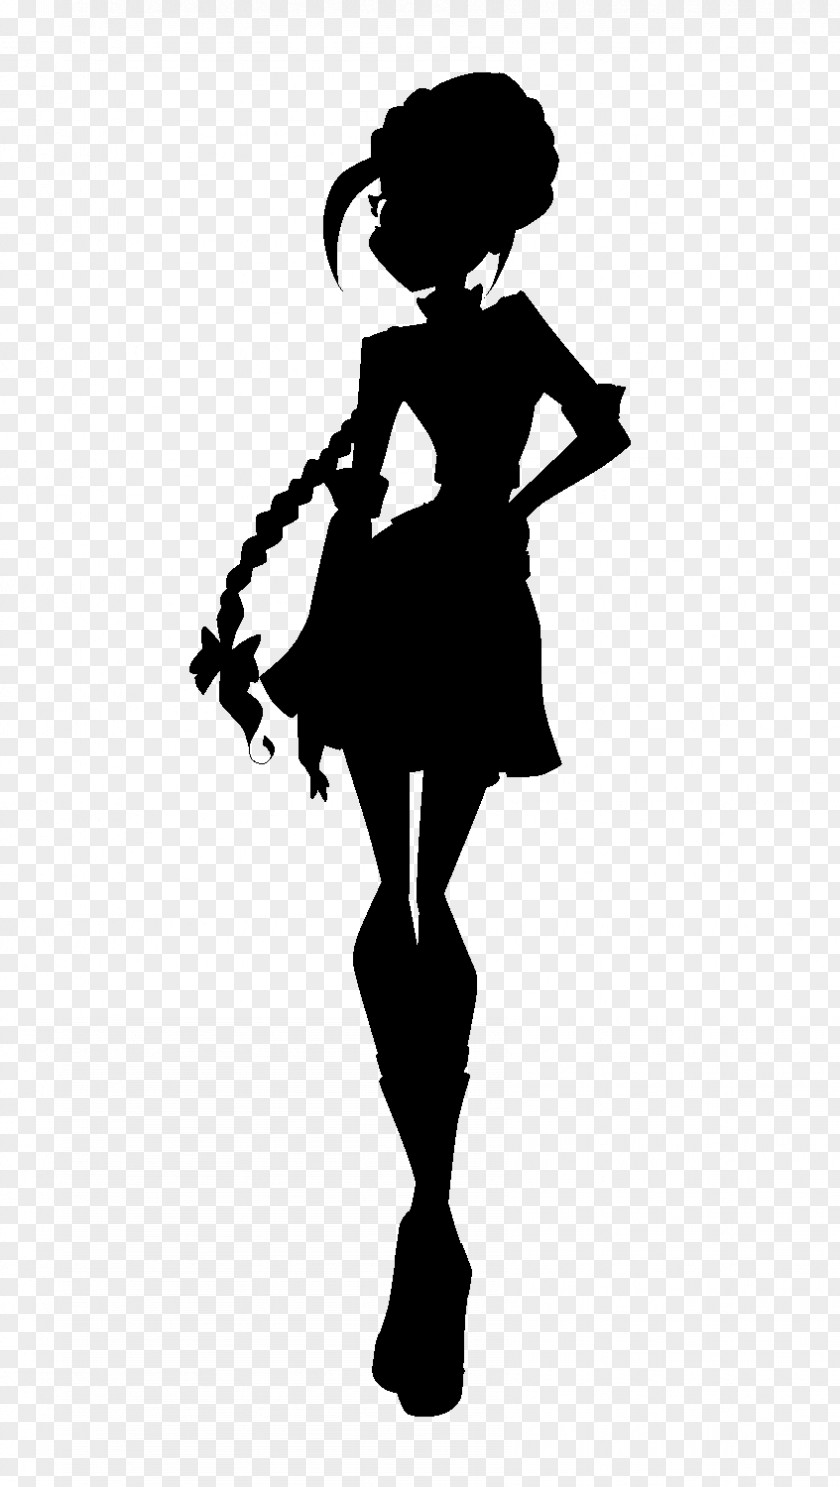 Shoe Illustration Character Silhouette Fiction PNG